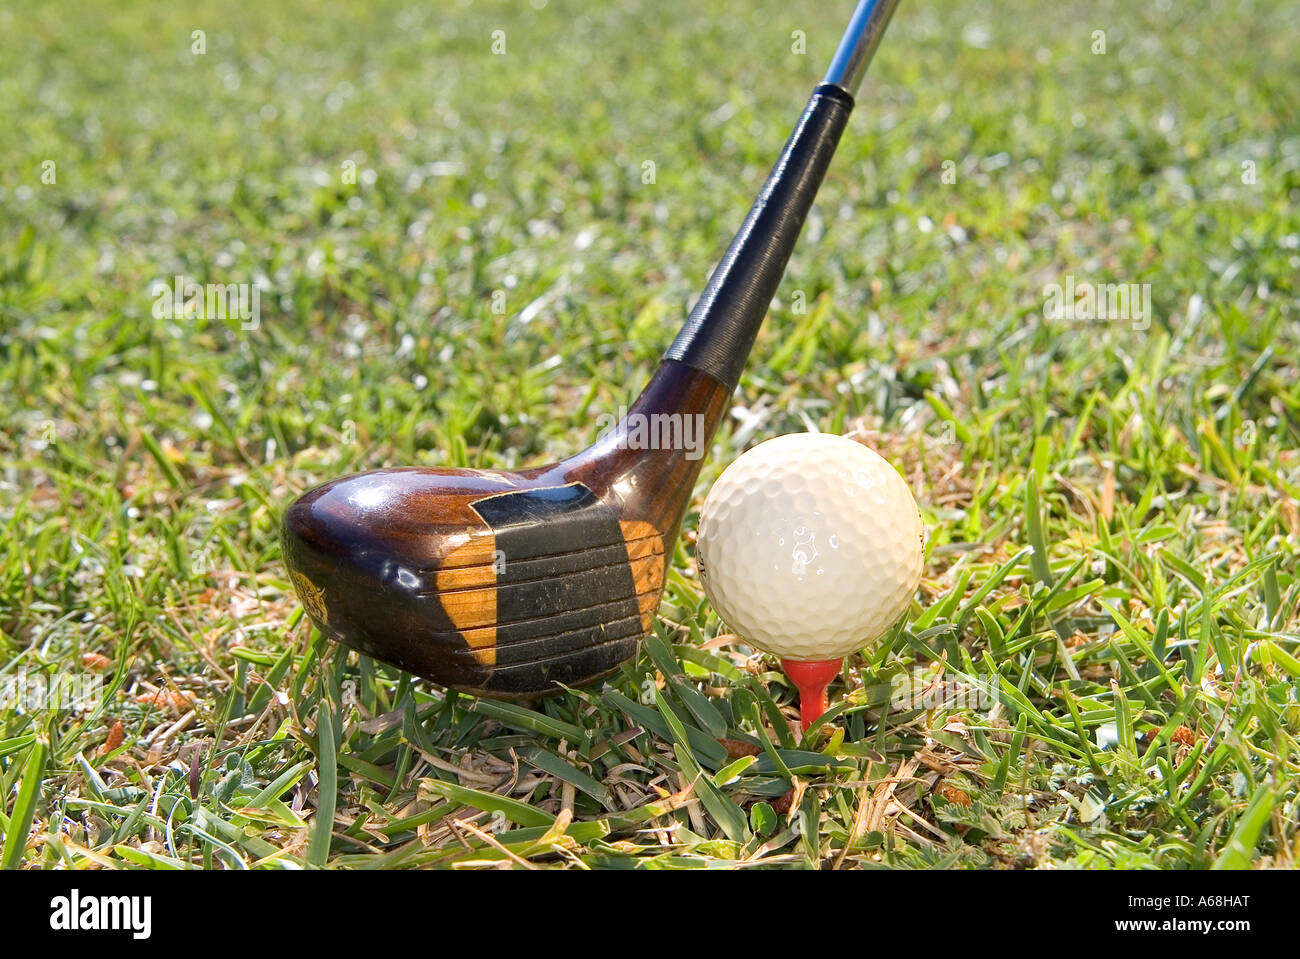 Golf ball and club Stock Photo